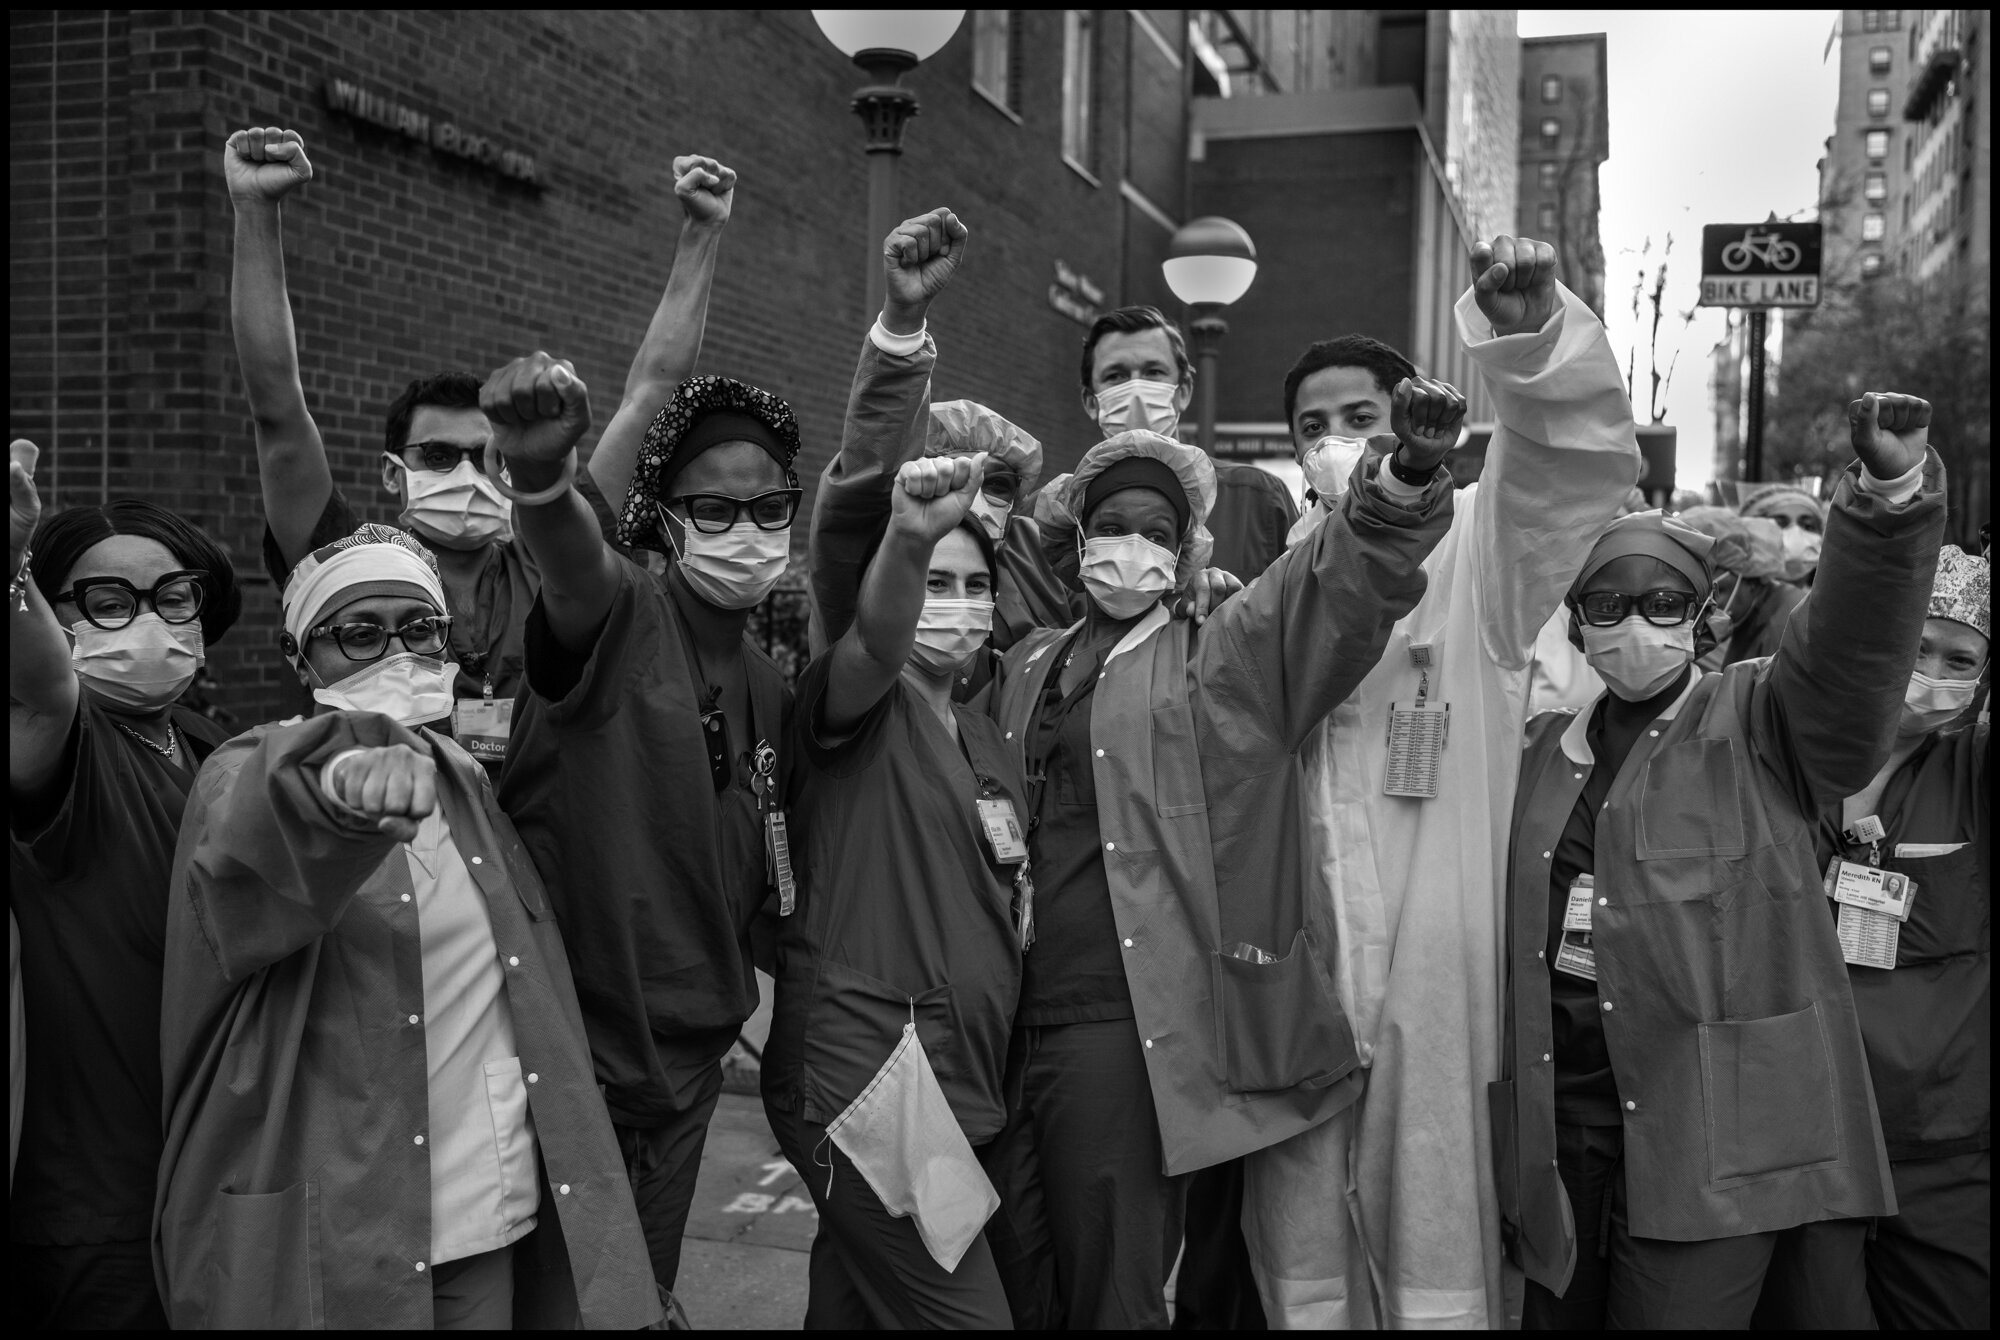  A group of ICU nurses from Lenox Hill Hospital.   May 3, 2020. © Peter Turnley.   ID# 36-027 